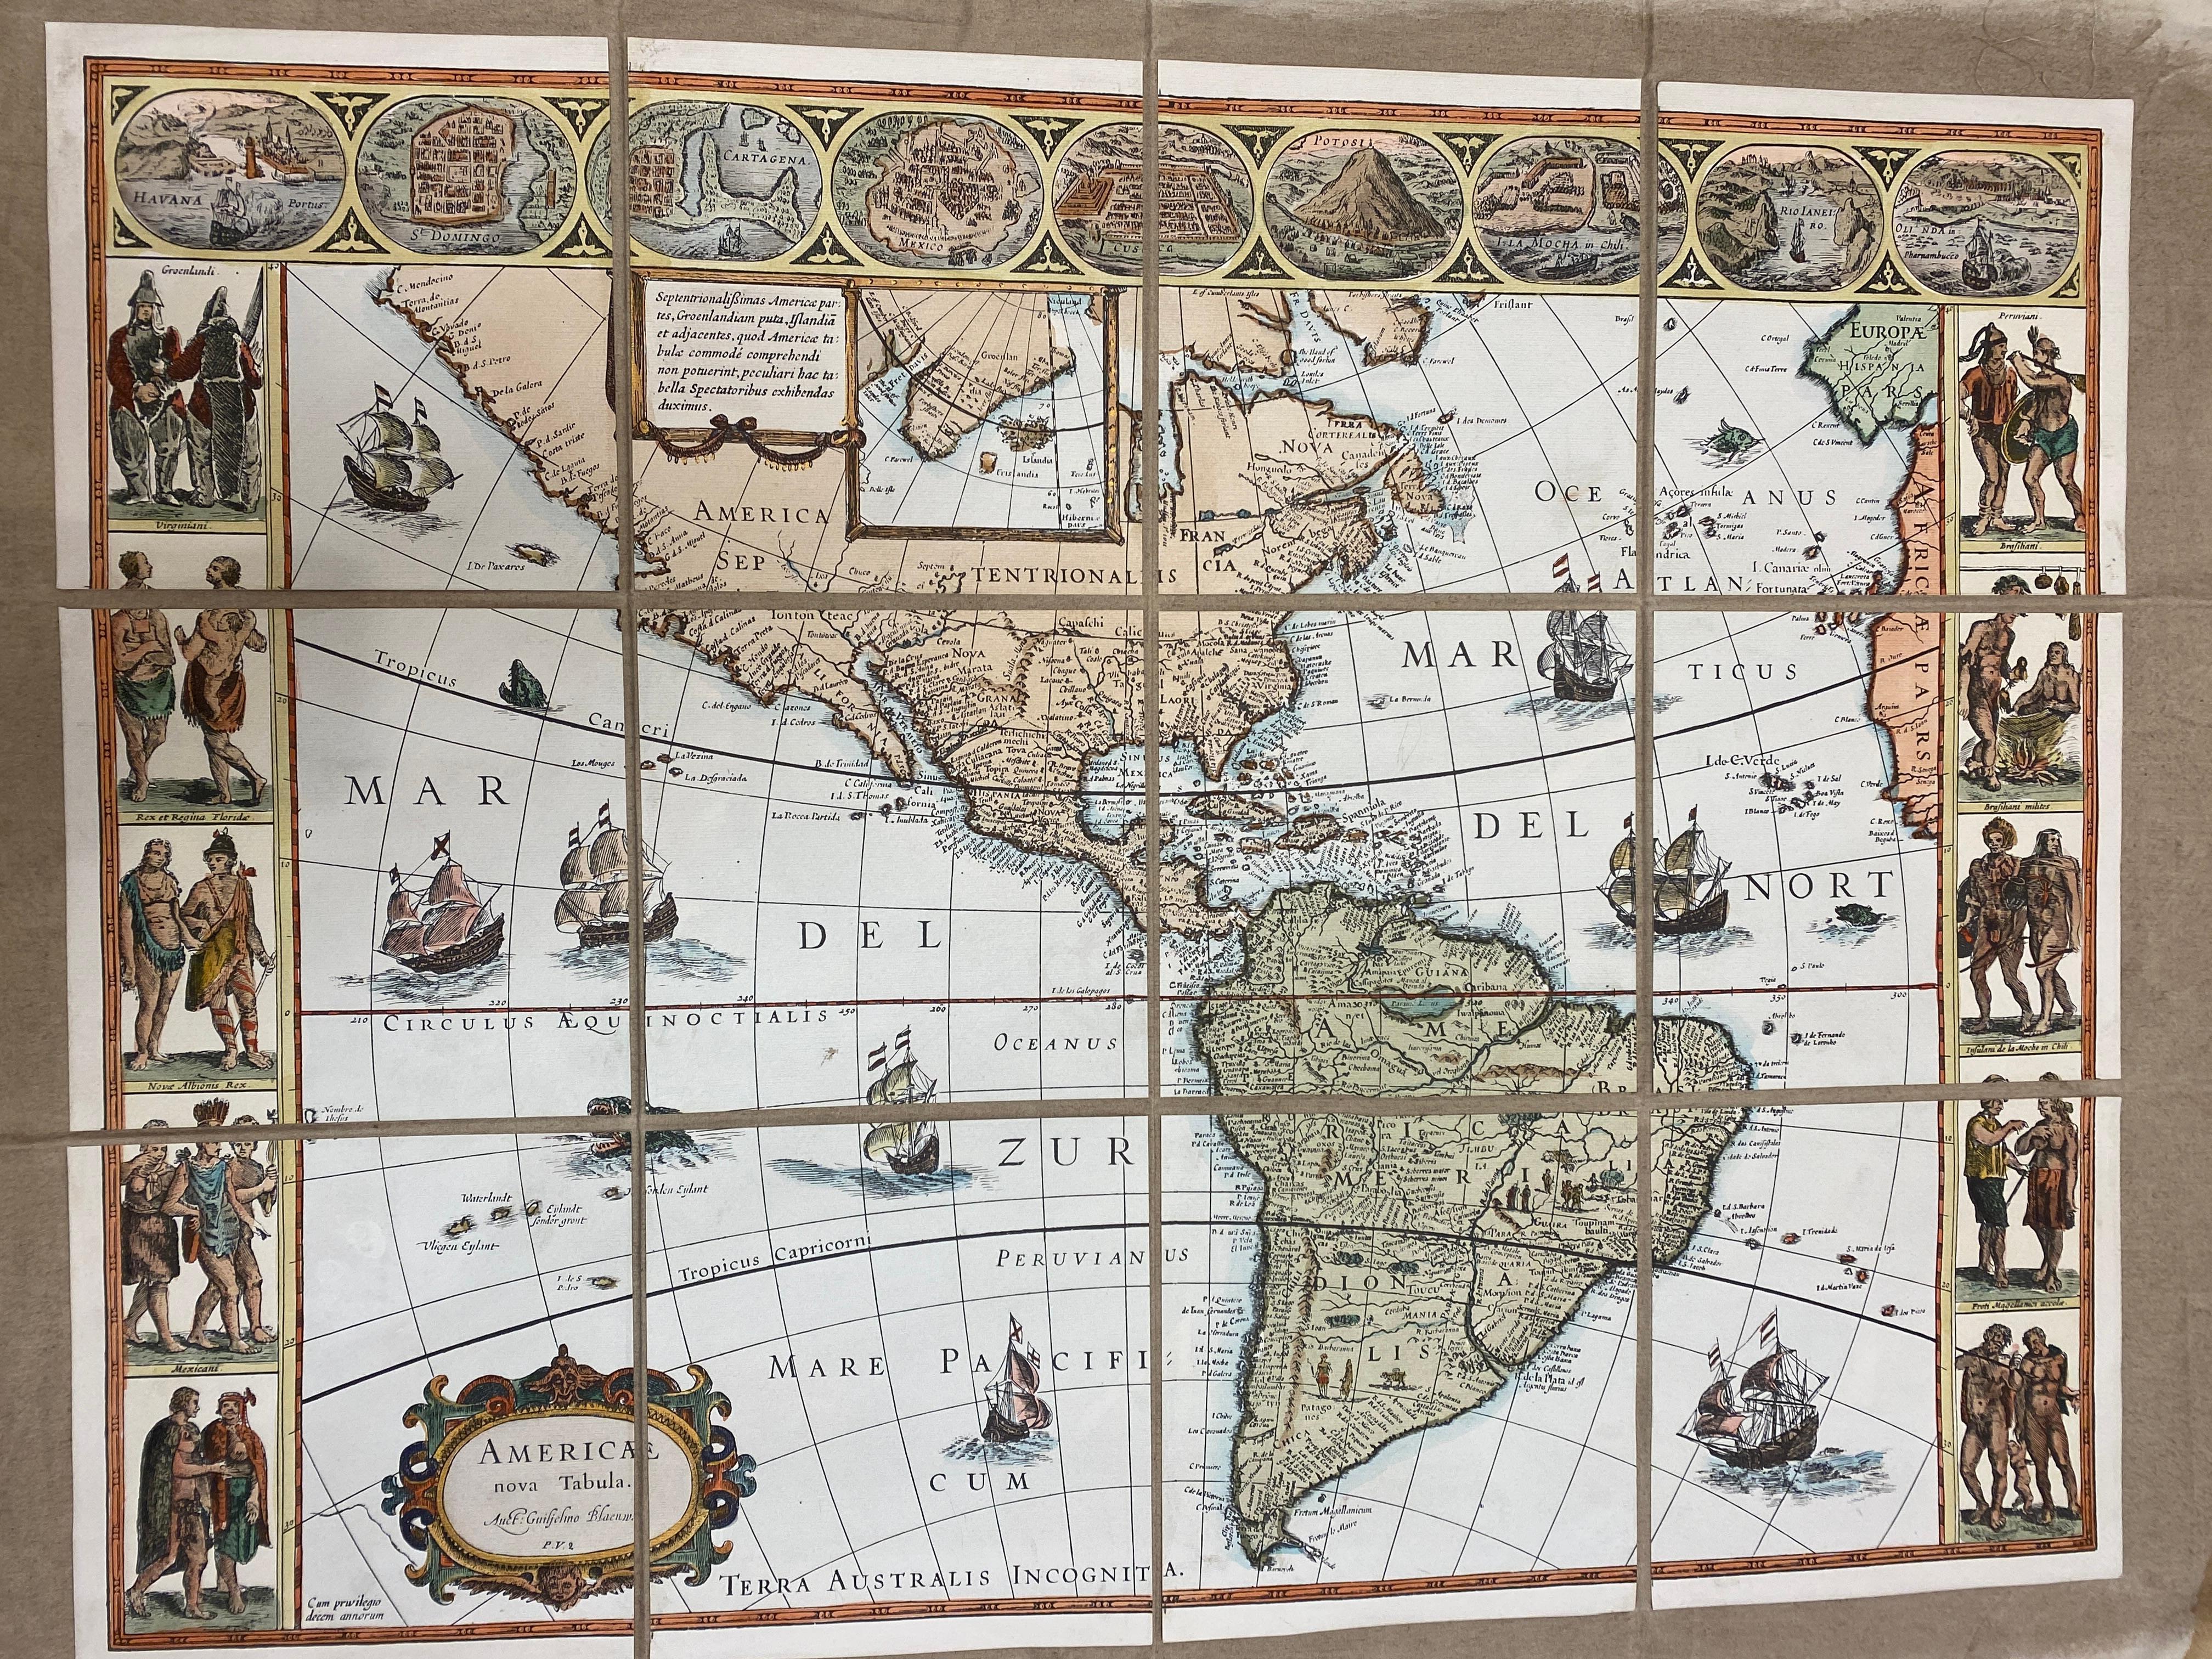 Beautiful reproduction of an antique map showing th Planisfere, with continets, lands and their populations.
We can see with what mastery of joints and vivid colours the author depicts lands, , maps and different populations. 
The planisfers are